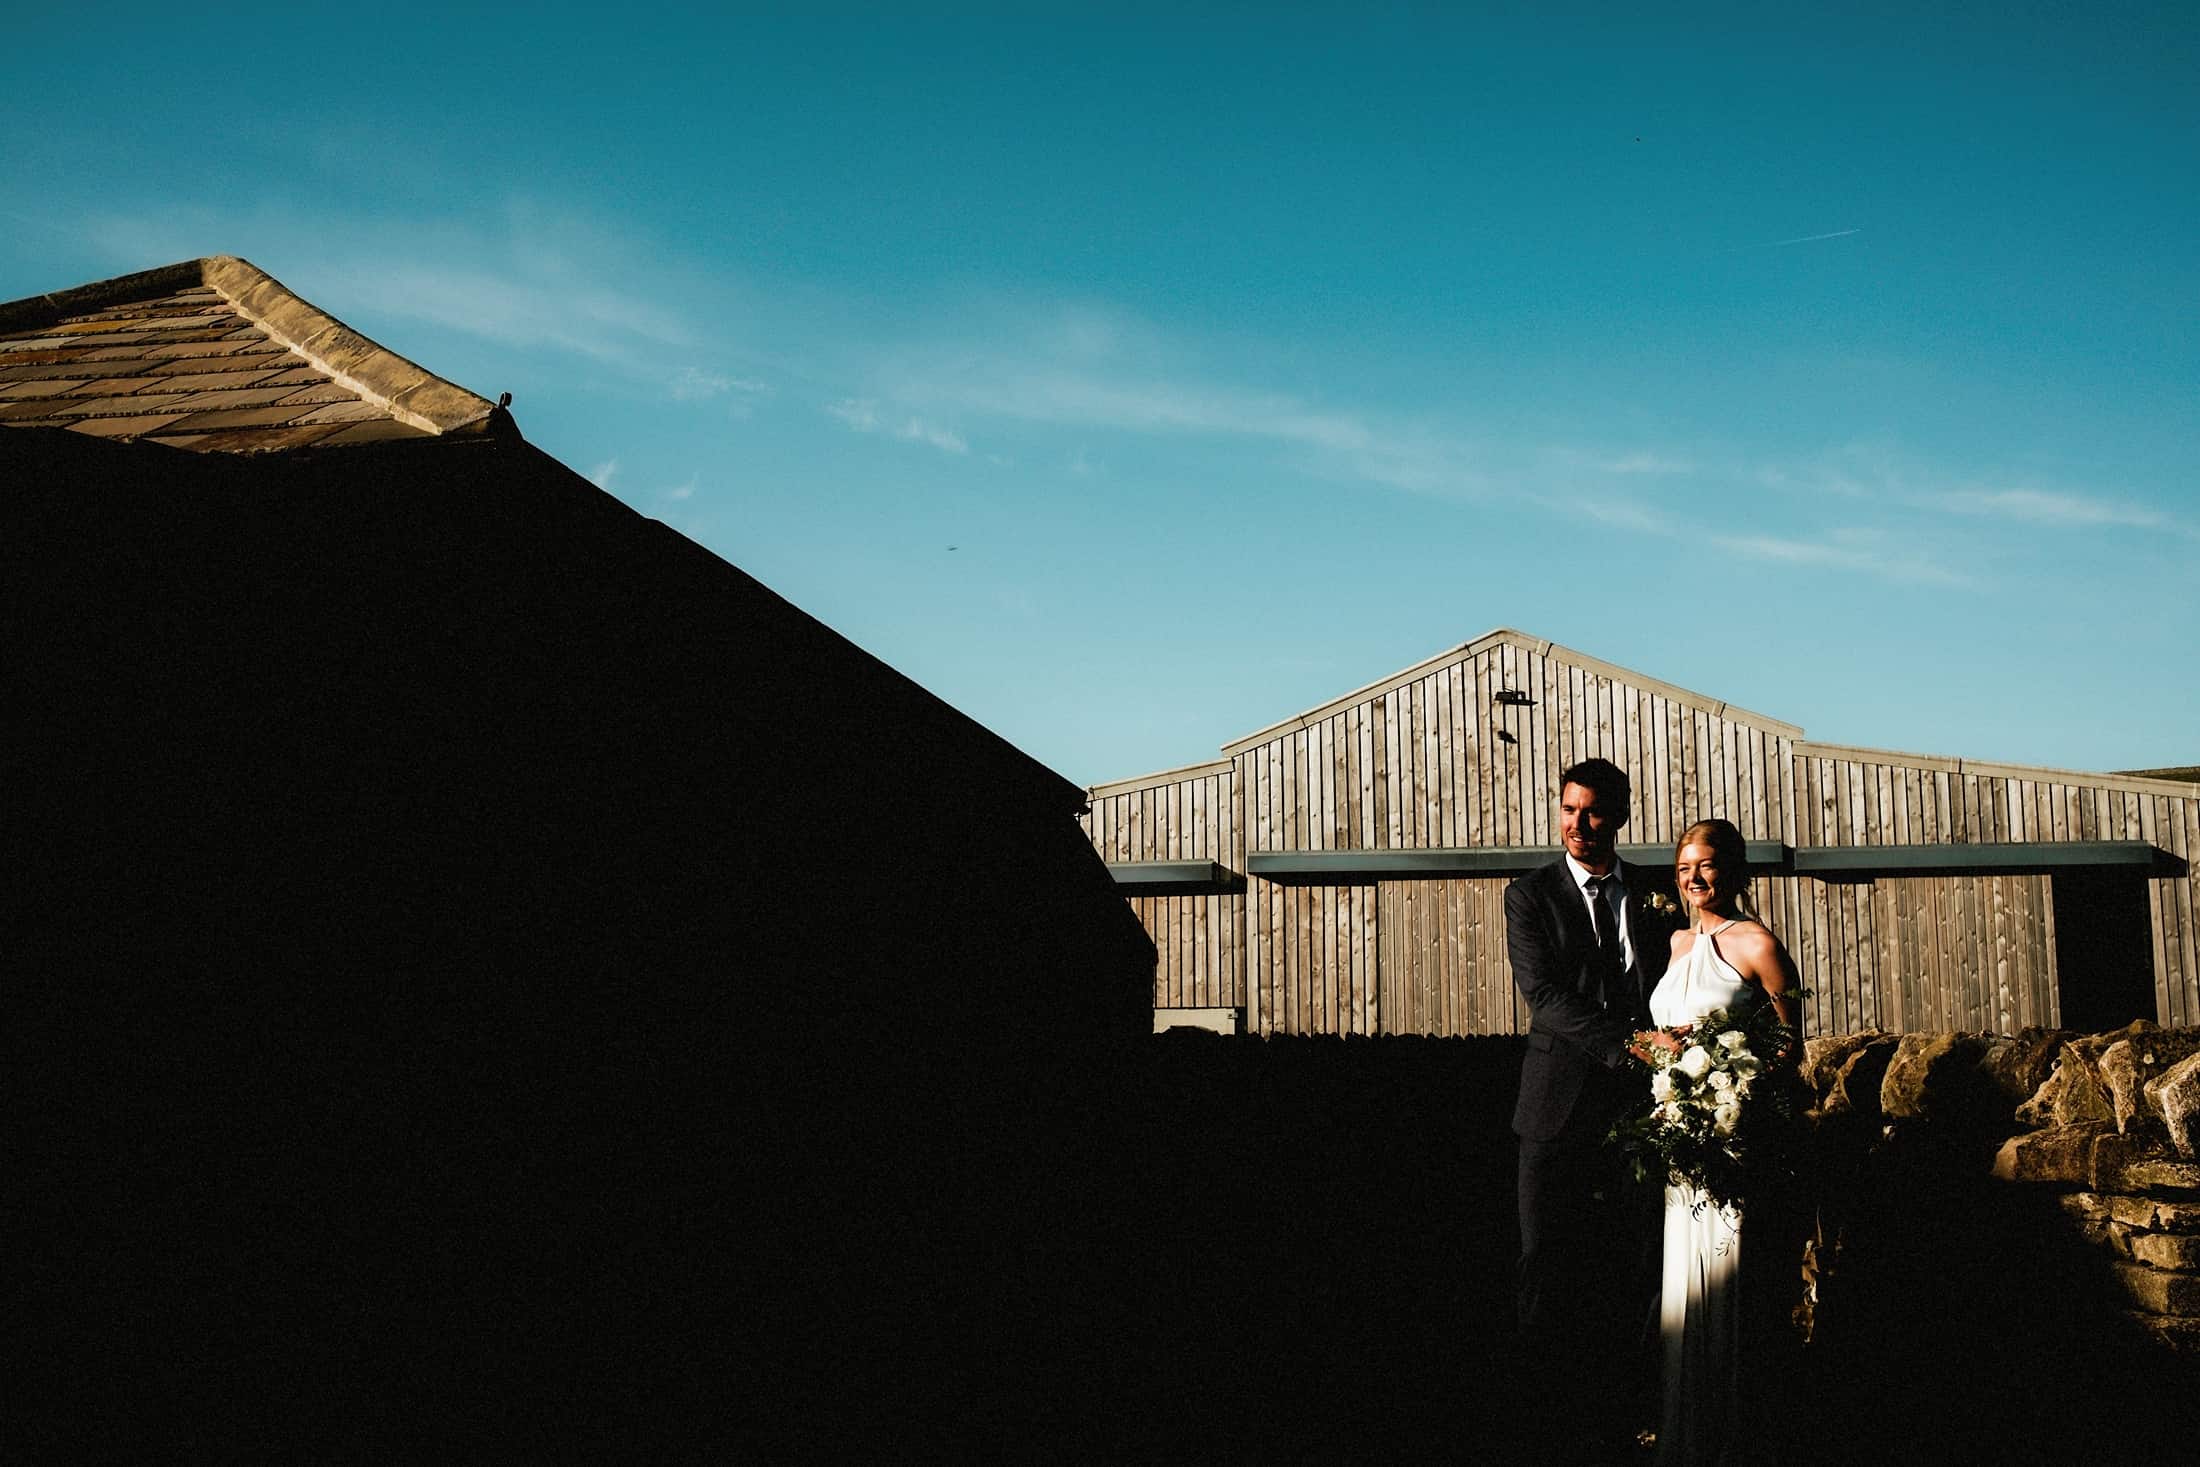 Lizzie & Tom's Telfit Farm wedding photography by North East wedding photographer Andy Turner